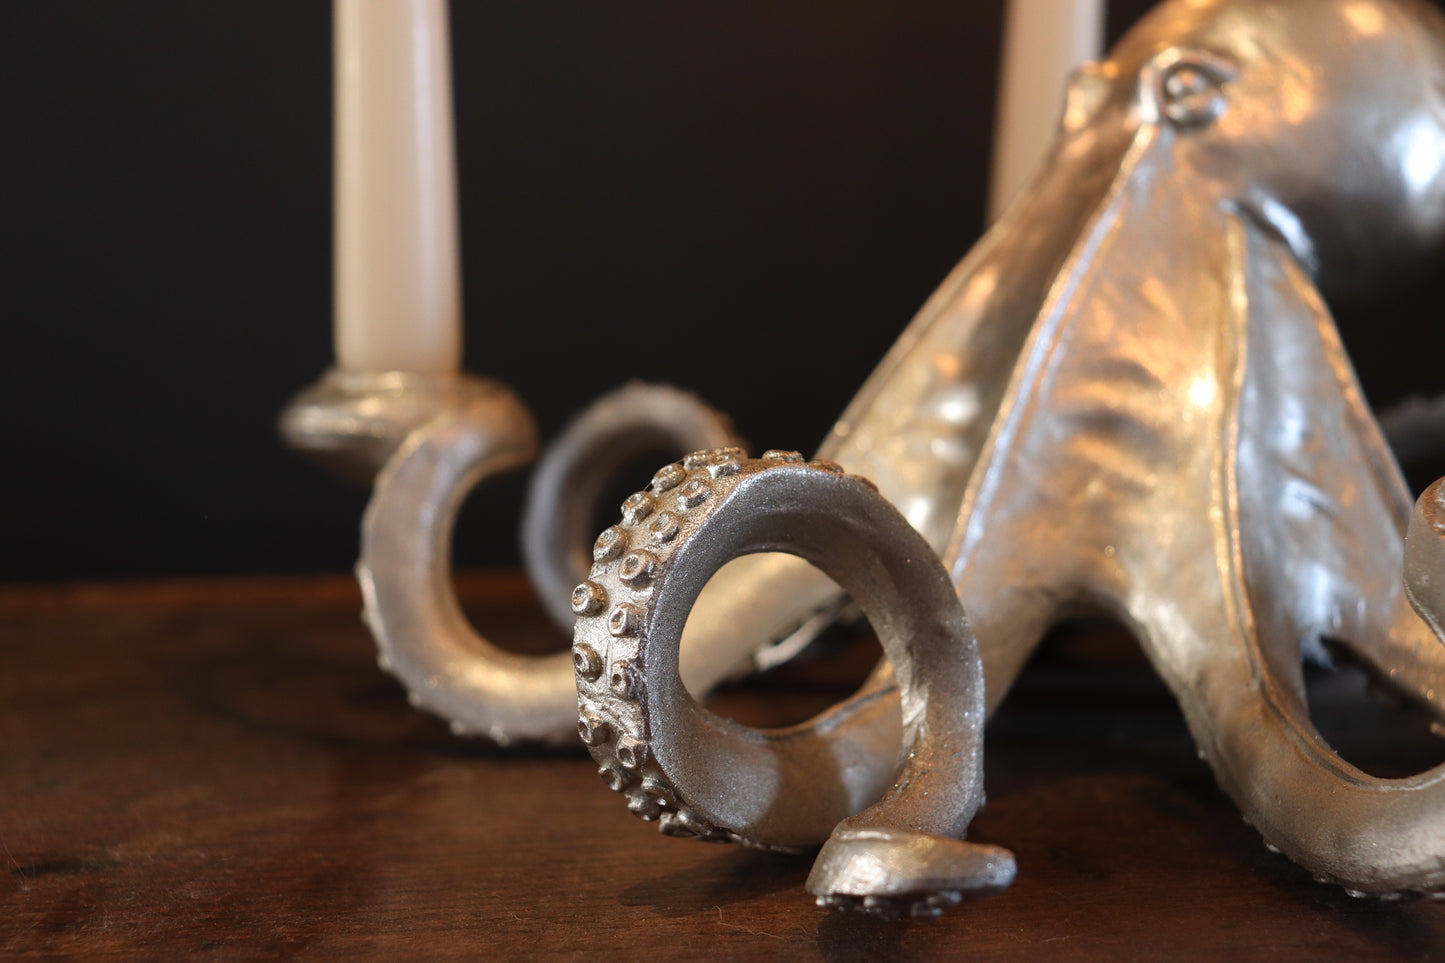 Silver Octopus Candle Holder